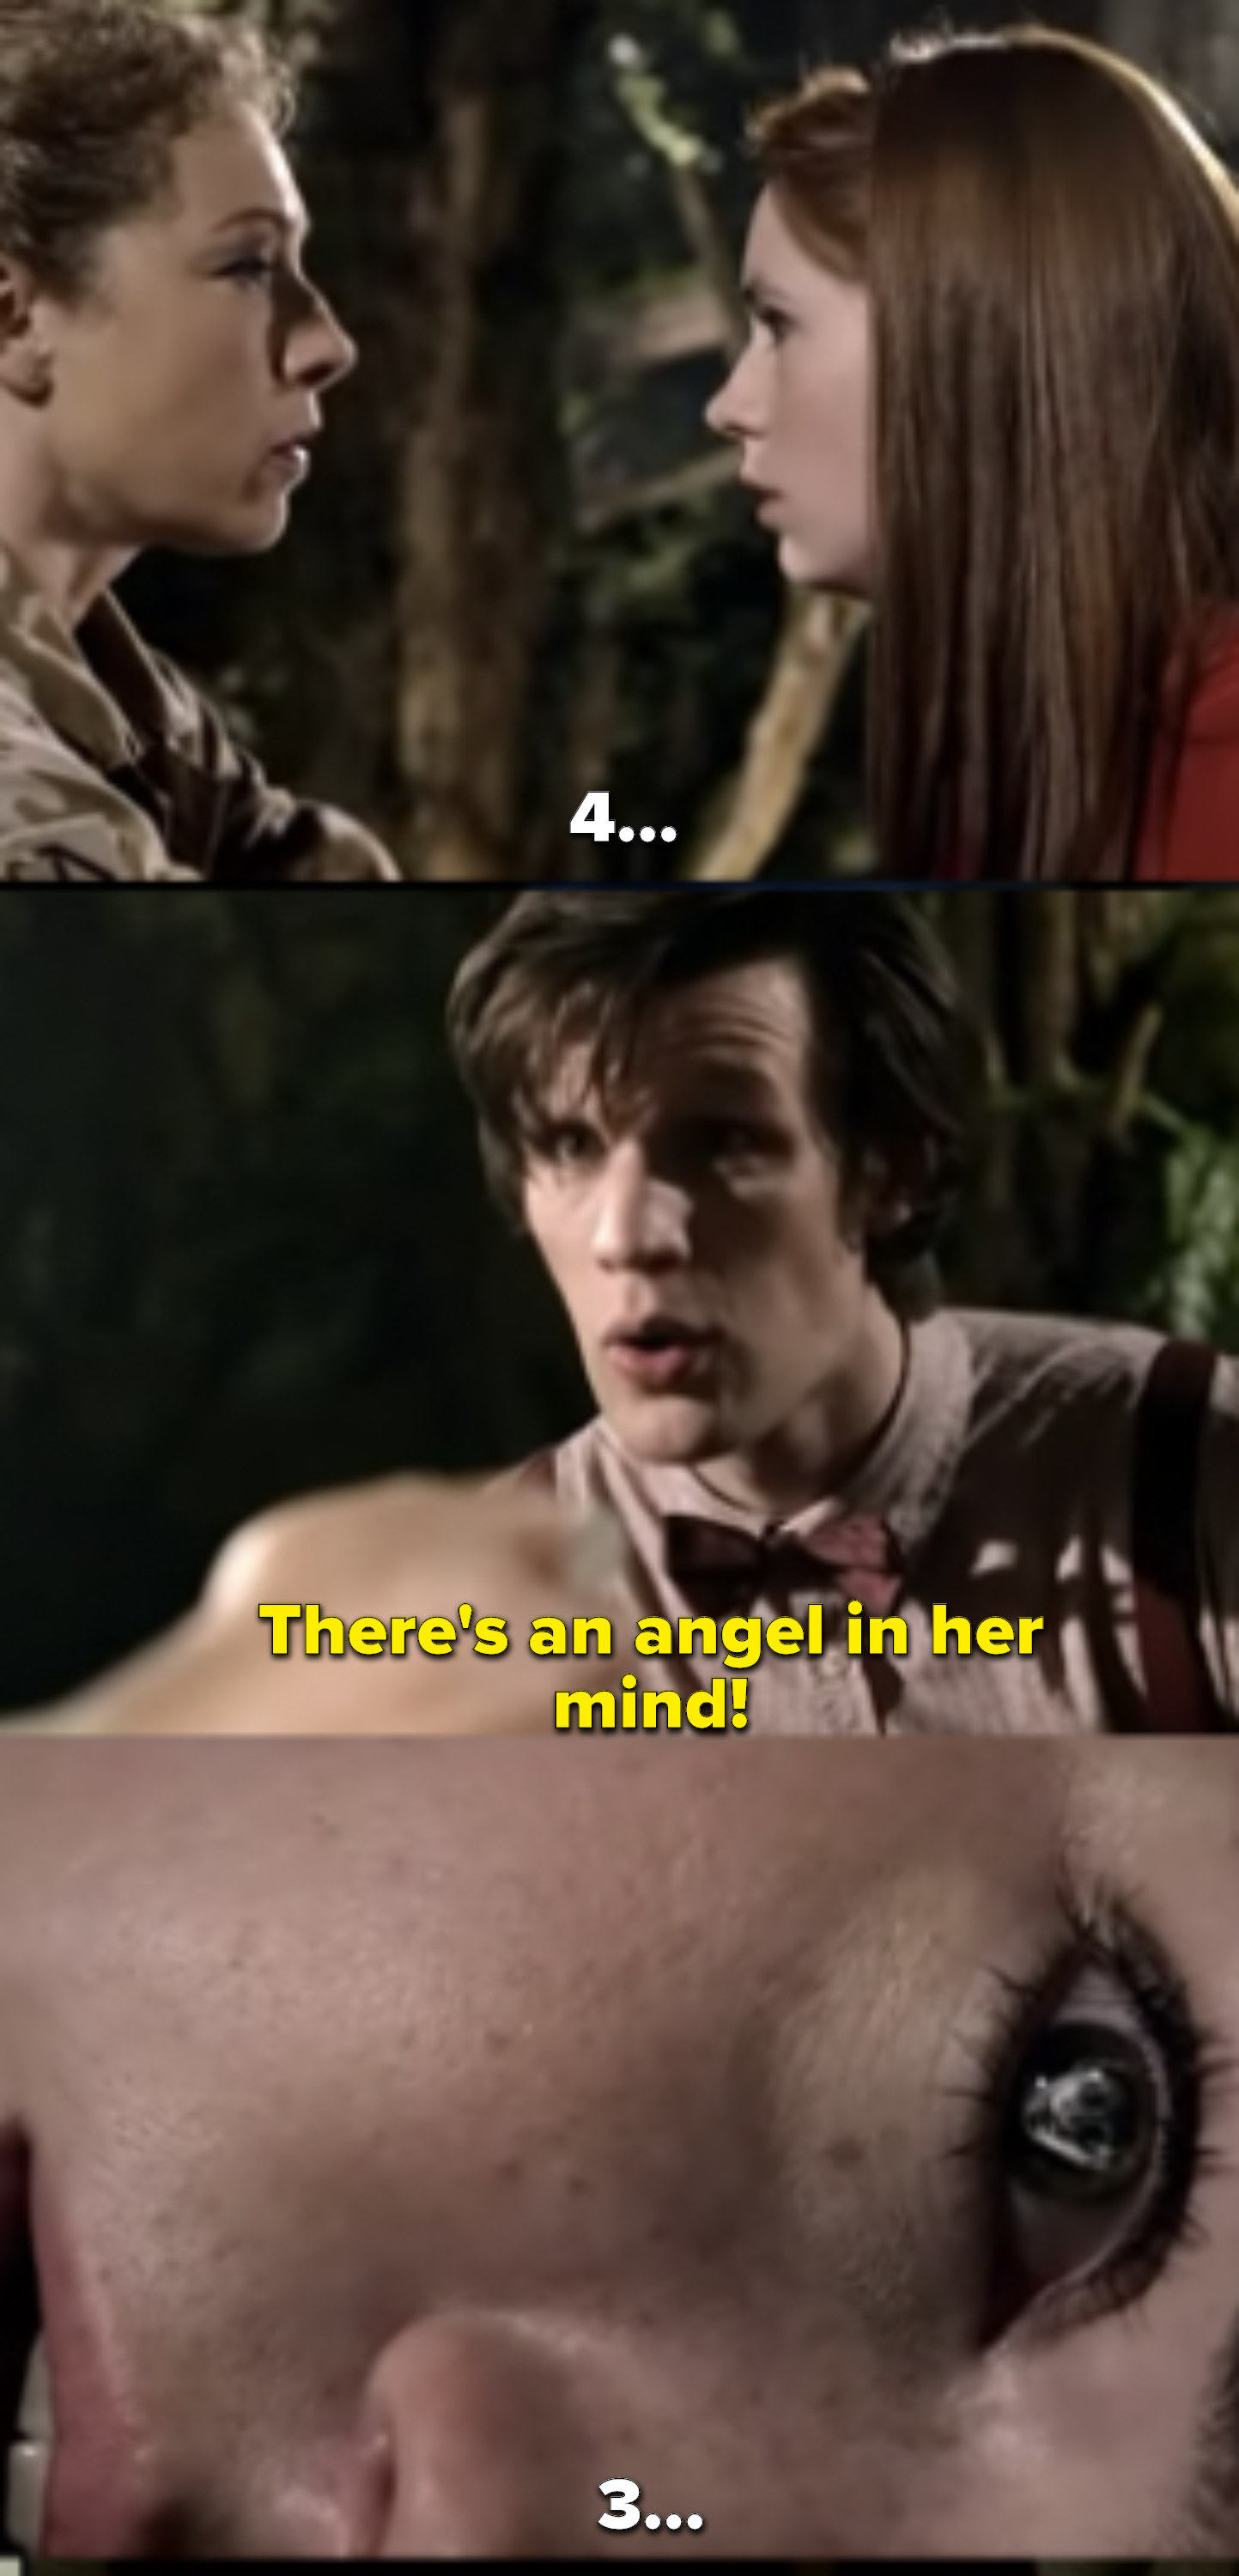 Amy says &quot;4...&quot; and then the Doctor realizes there are angels in her mind, but she&#x27;s already counting to 3